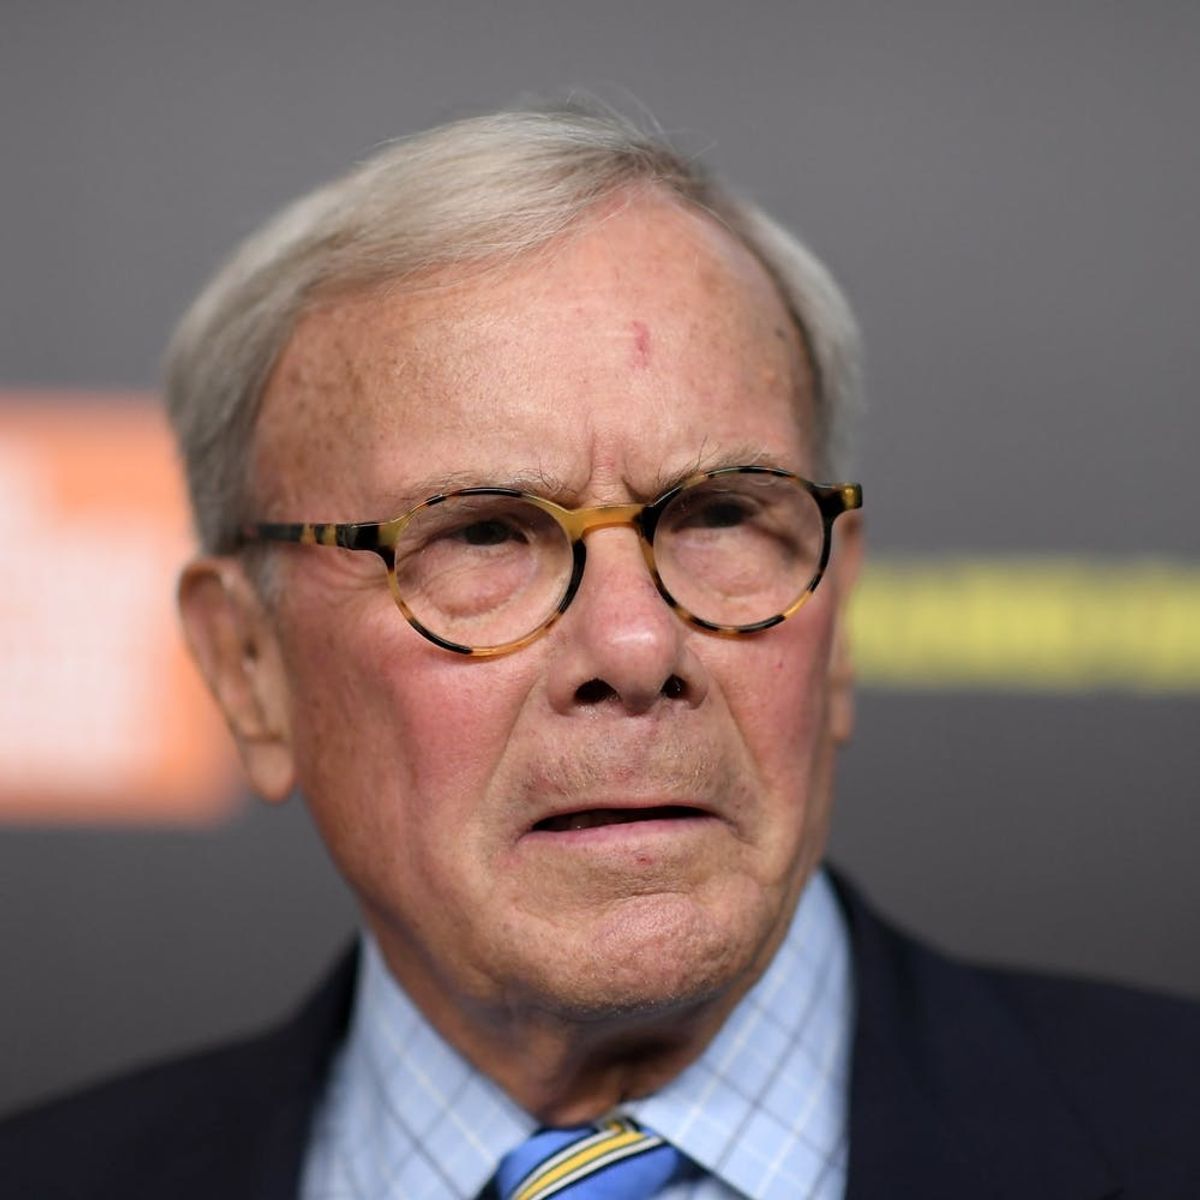 Tom Brokaw’s Comments About Hispanic Americans Show How Insidious Ethnic Stereotyping Is